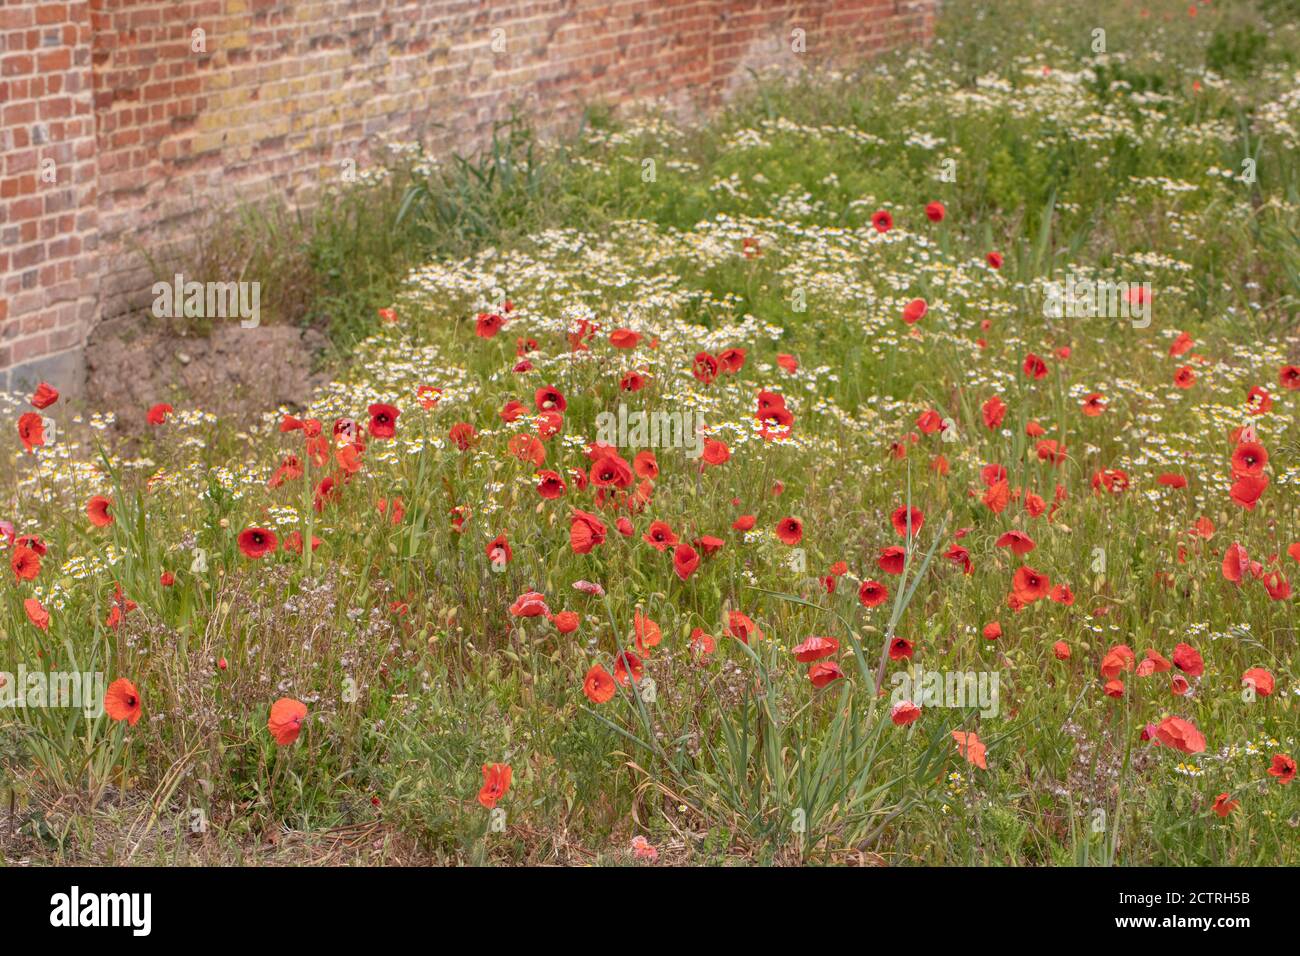 Poppies (Papava rhoeas), Scented Mayweed (Matricaria recutita), growing together and flowering on disturbed ground alongside farm buildings. May-June, Stock Photo